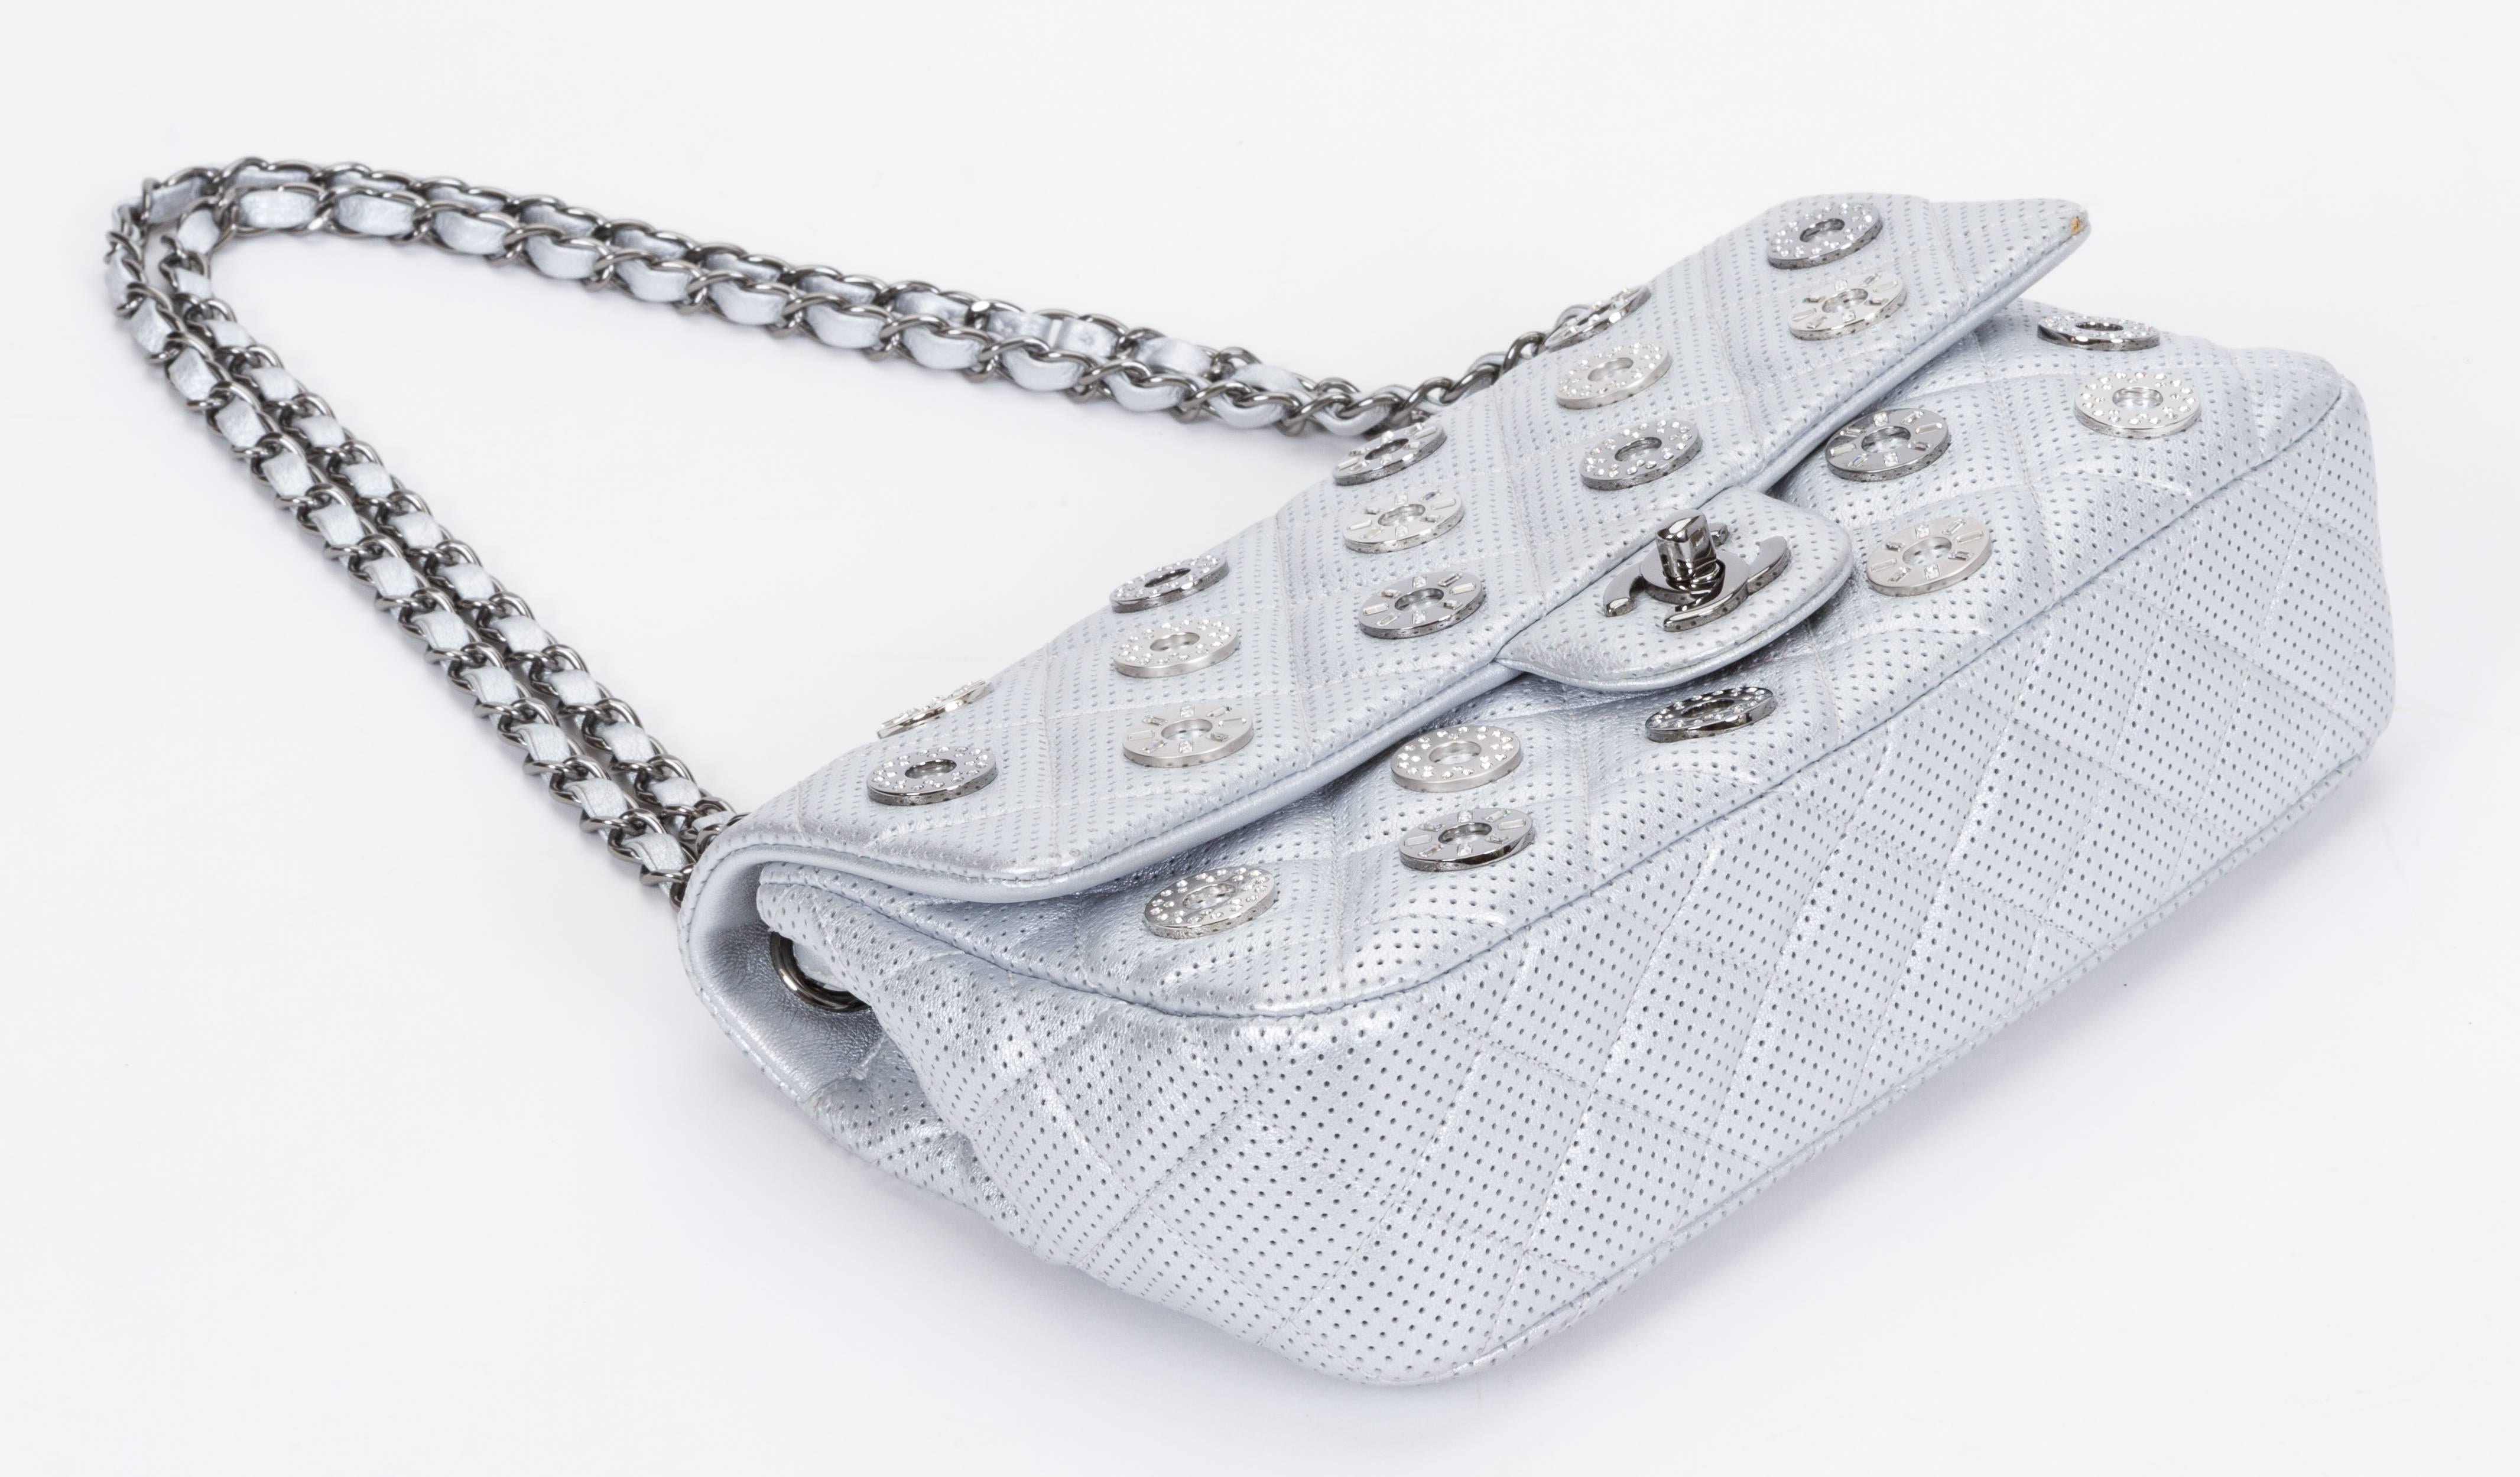 Women's Chanel Limited Edition Silver Jewel Coin Flap Bag